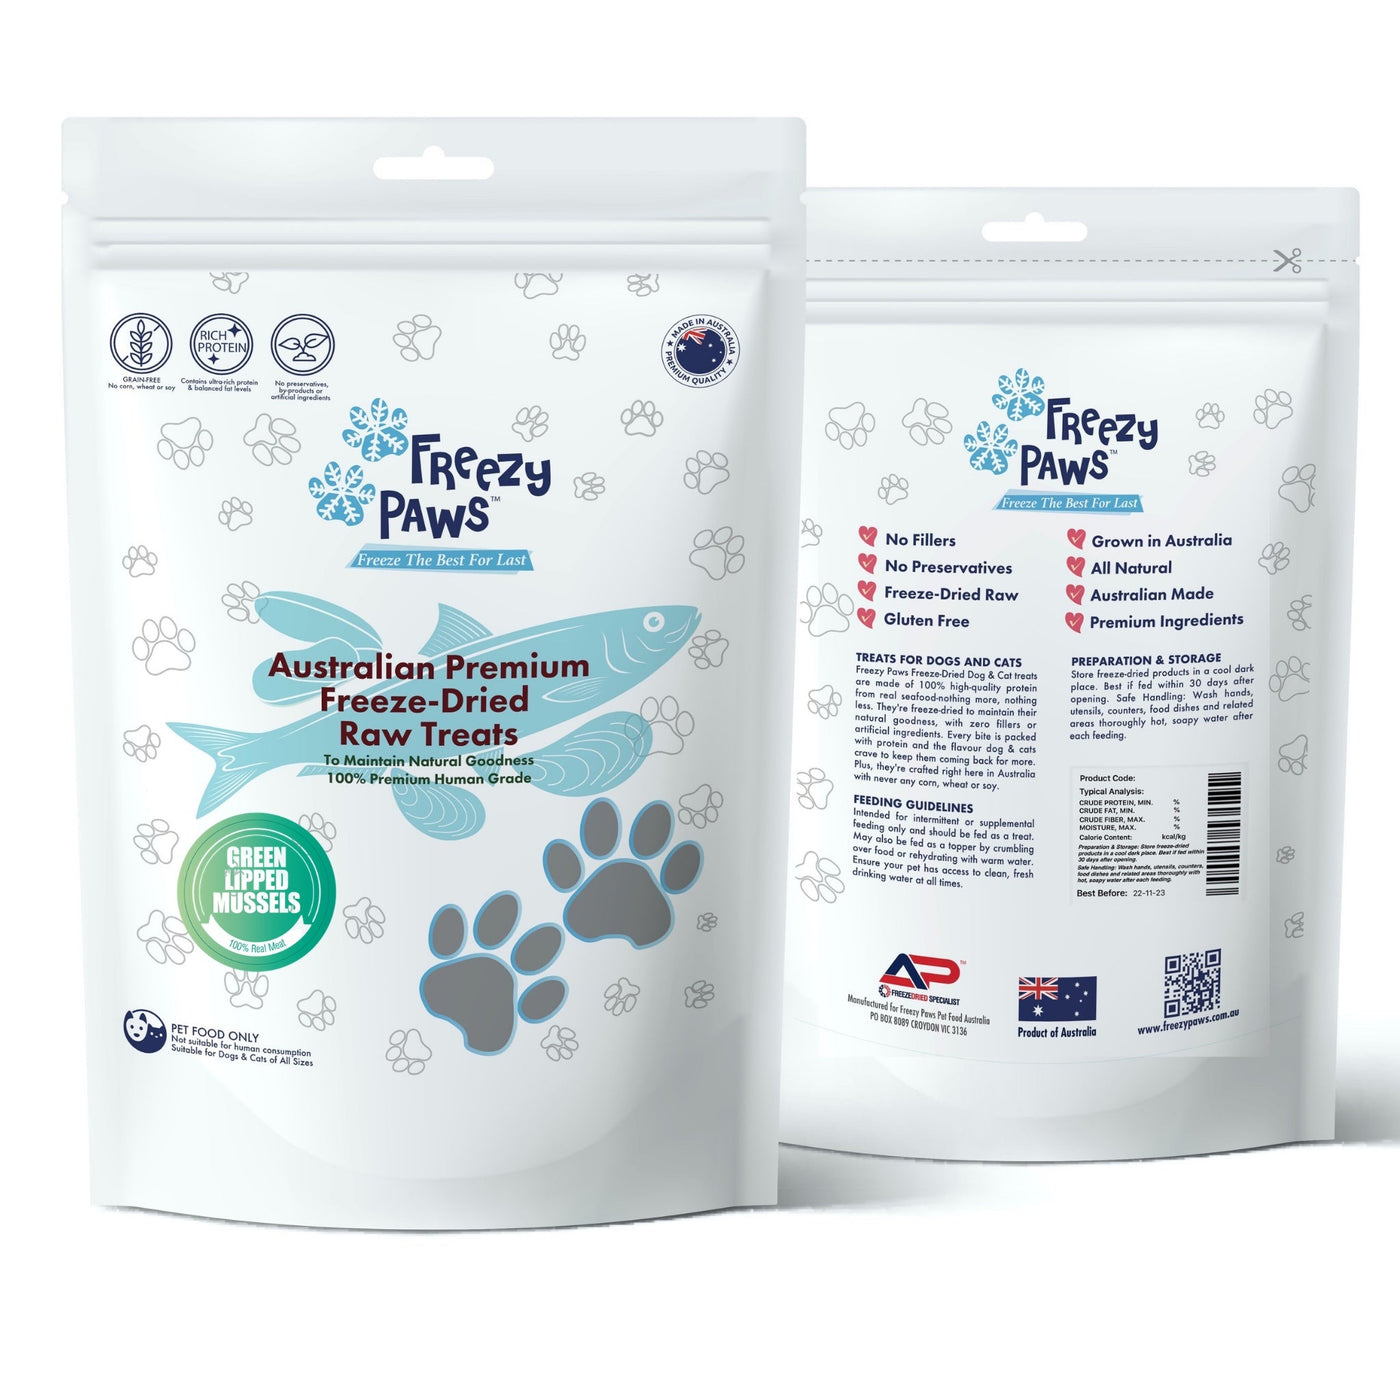 Freezy Paws Freeze Dried New Zealand Green Lipped Mussels Dog And Cat Treats 50g